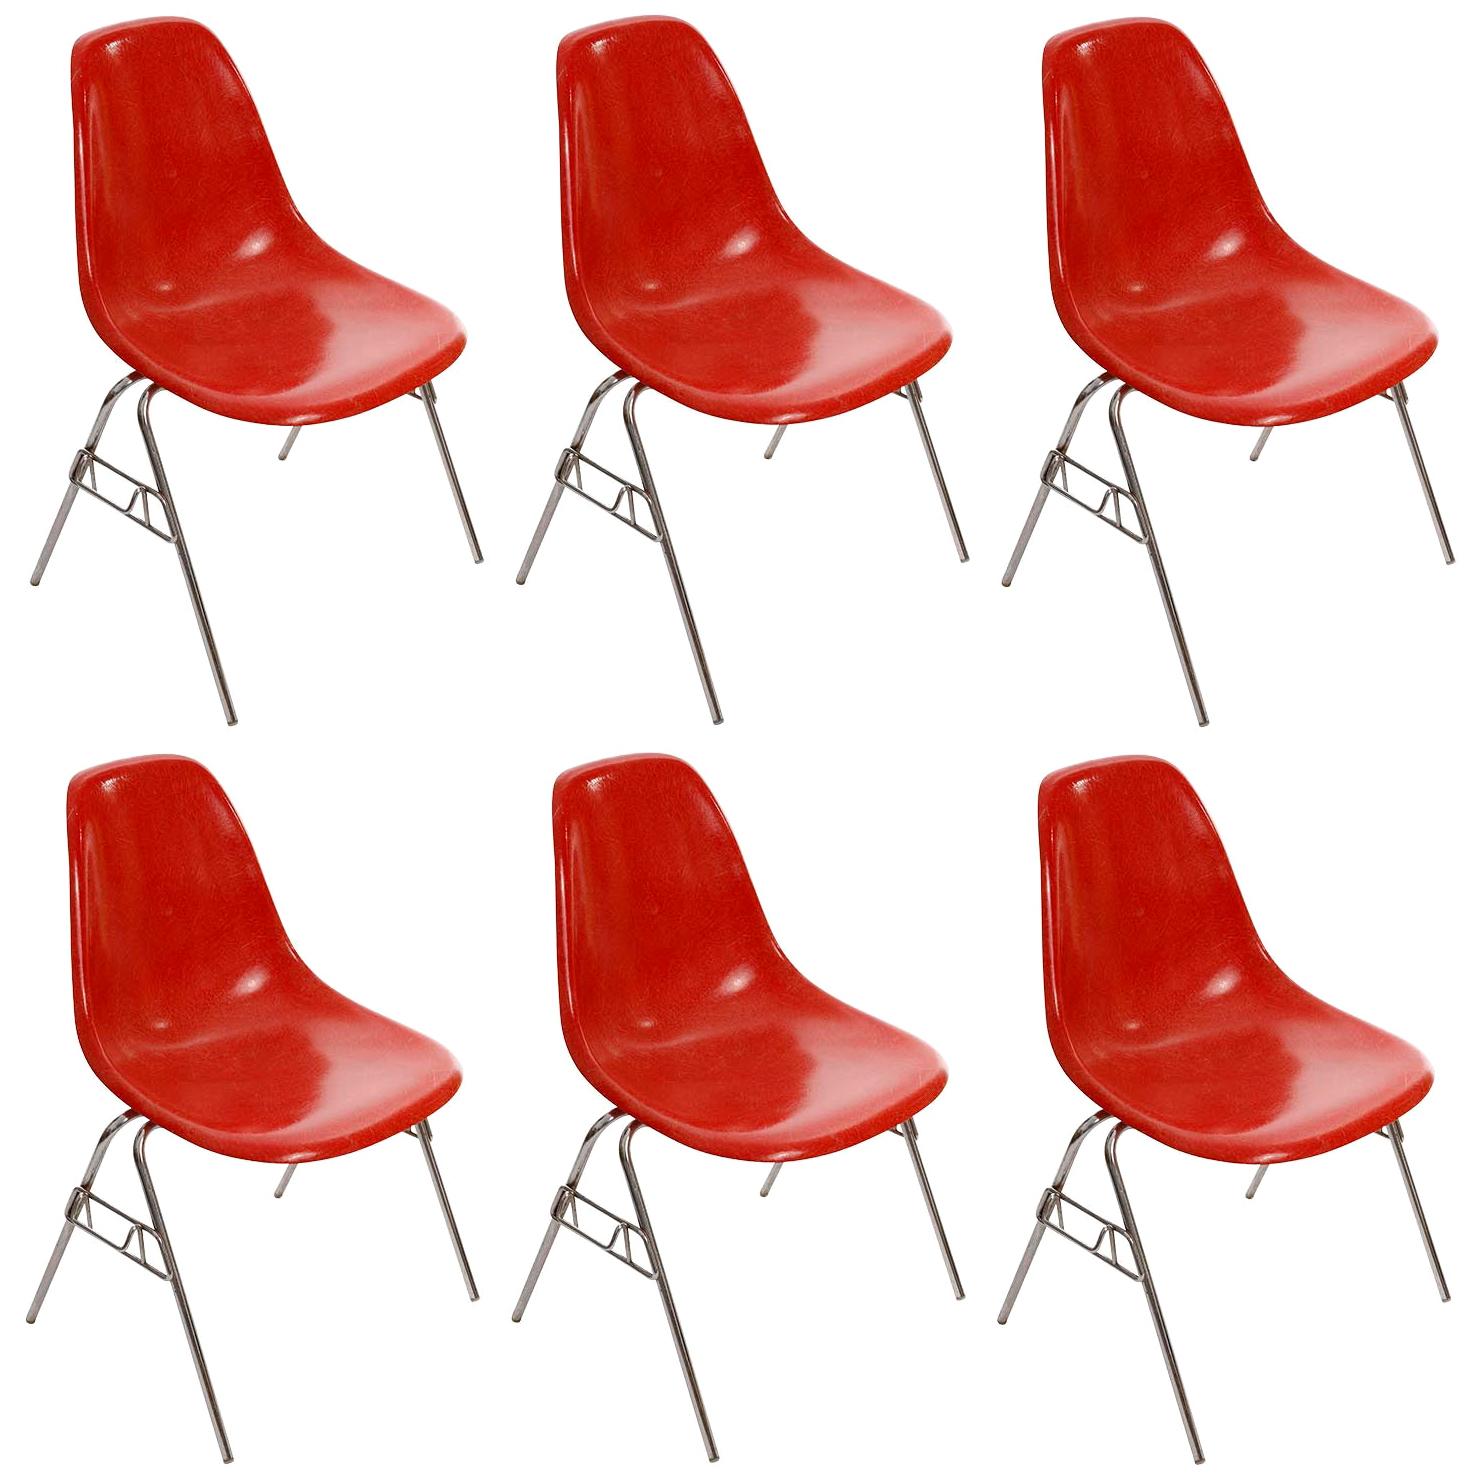 Six DSS Stacking Chairs, Charles & Ray Eames Herman Miller, Red Fiberglass, 1974